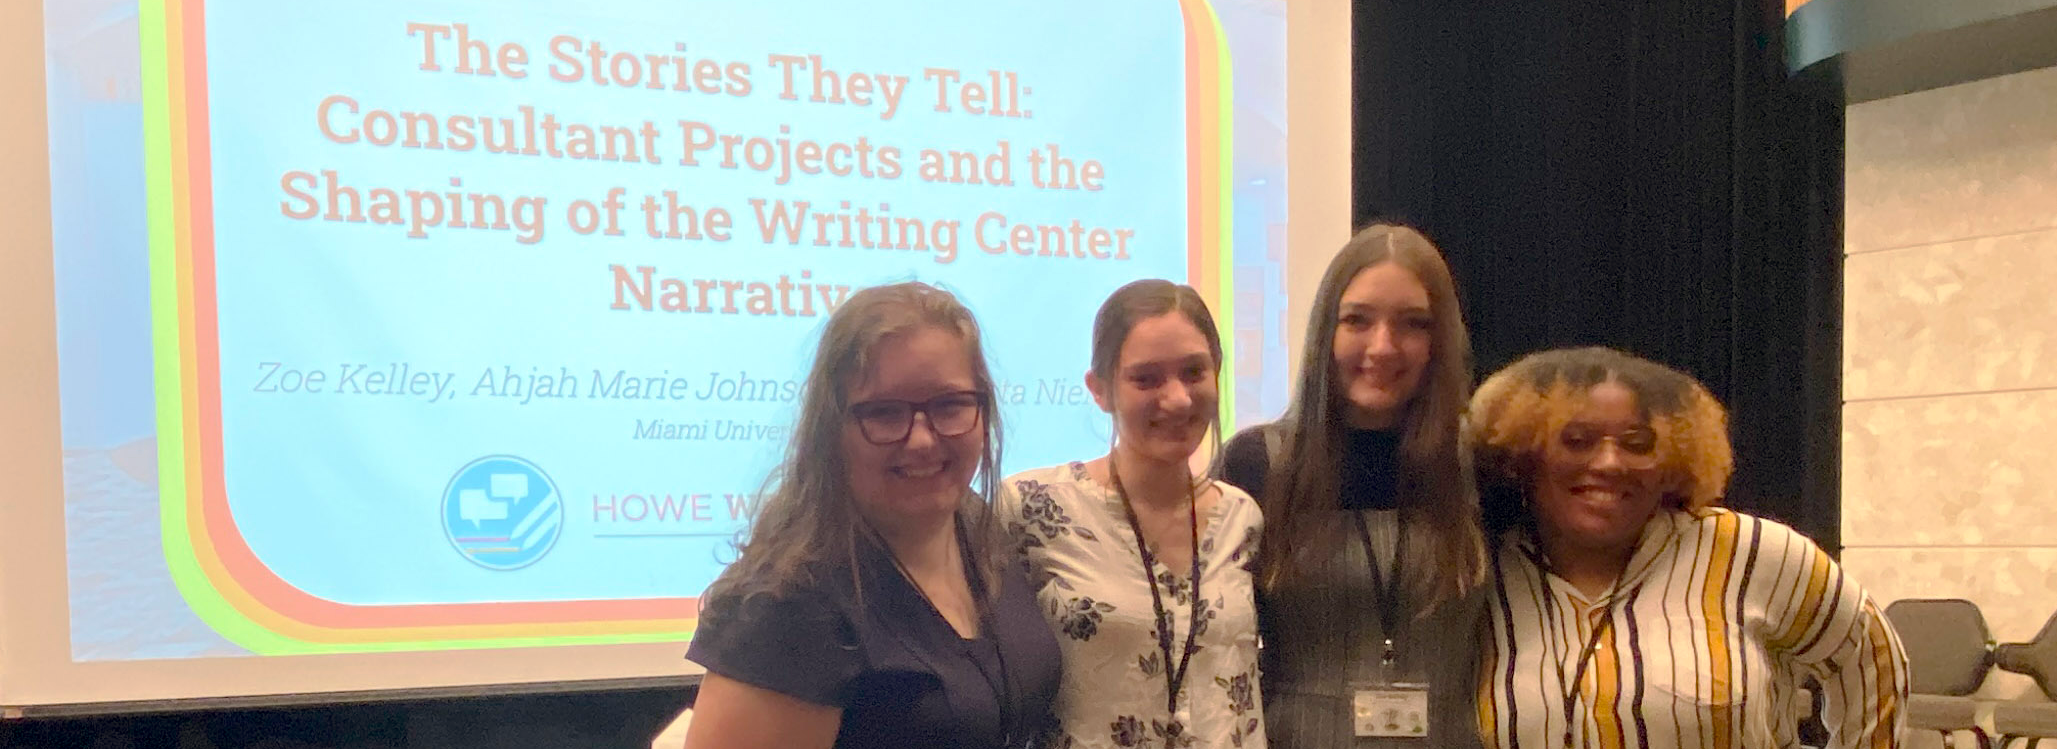 HWC Graduate Assistant Director and consultants Destiny Brugman, Christa Niemann, Zoe Kelley, and Ahjah Johnson, in front of a screen at the East Central Writing Centers Association Conference that reads "The Stories They Tell: Consultant Projects and the Shaping of the Writing Center Narriative